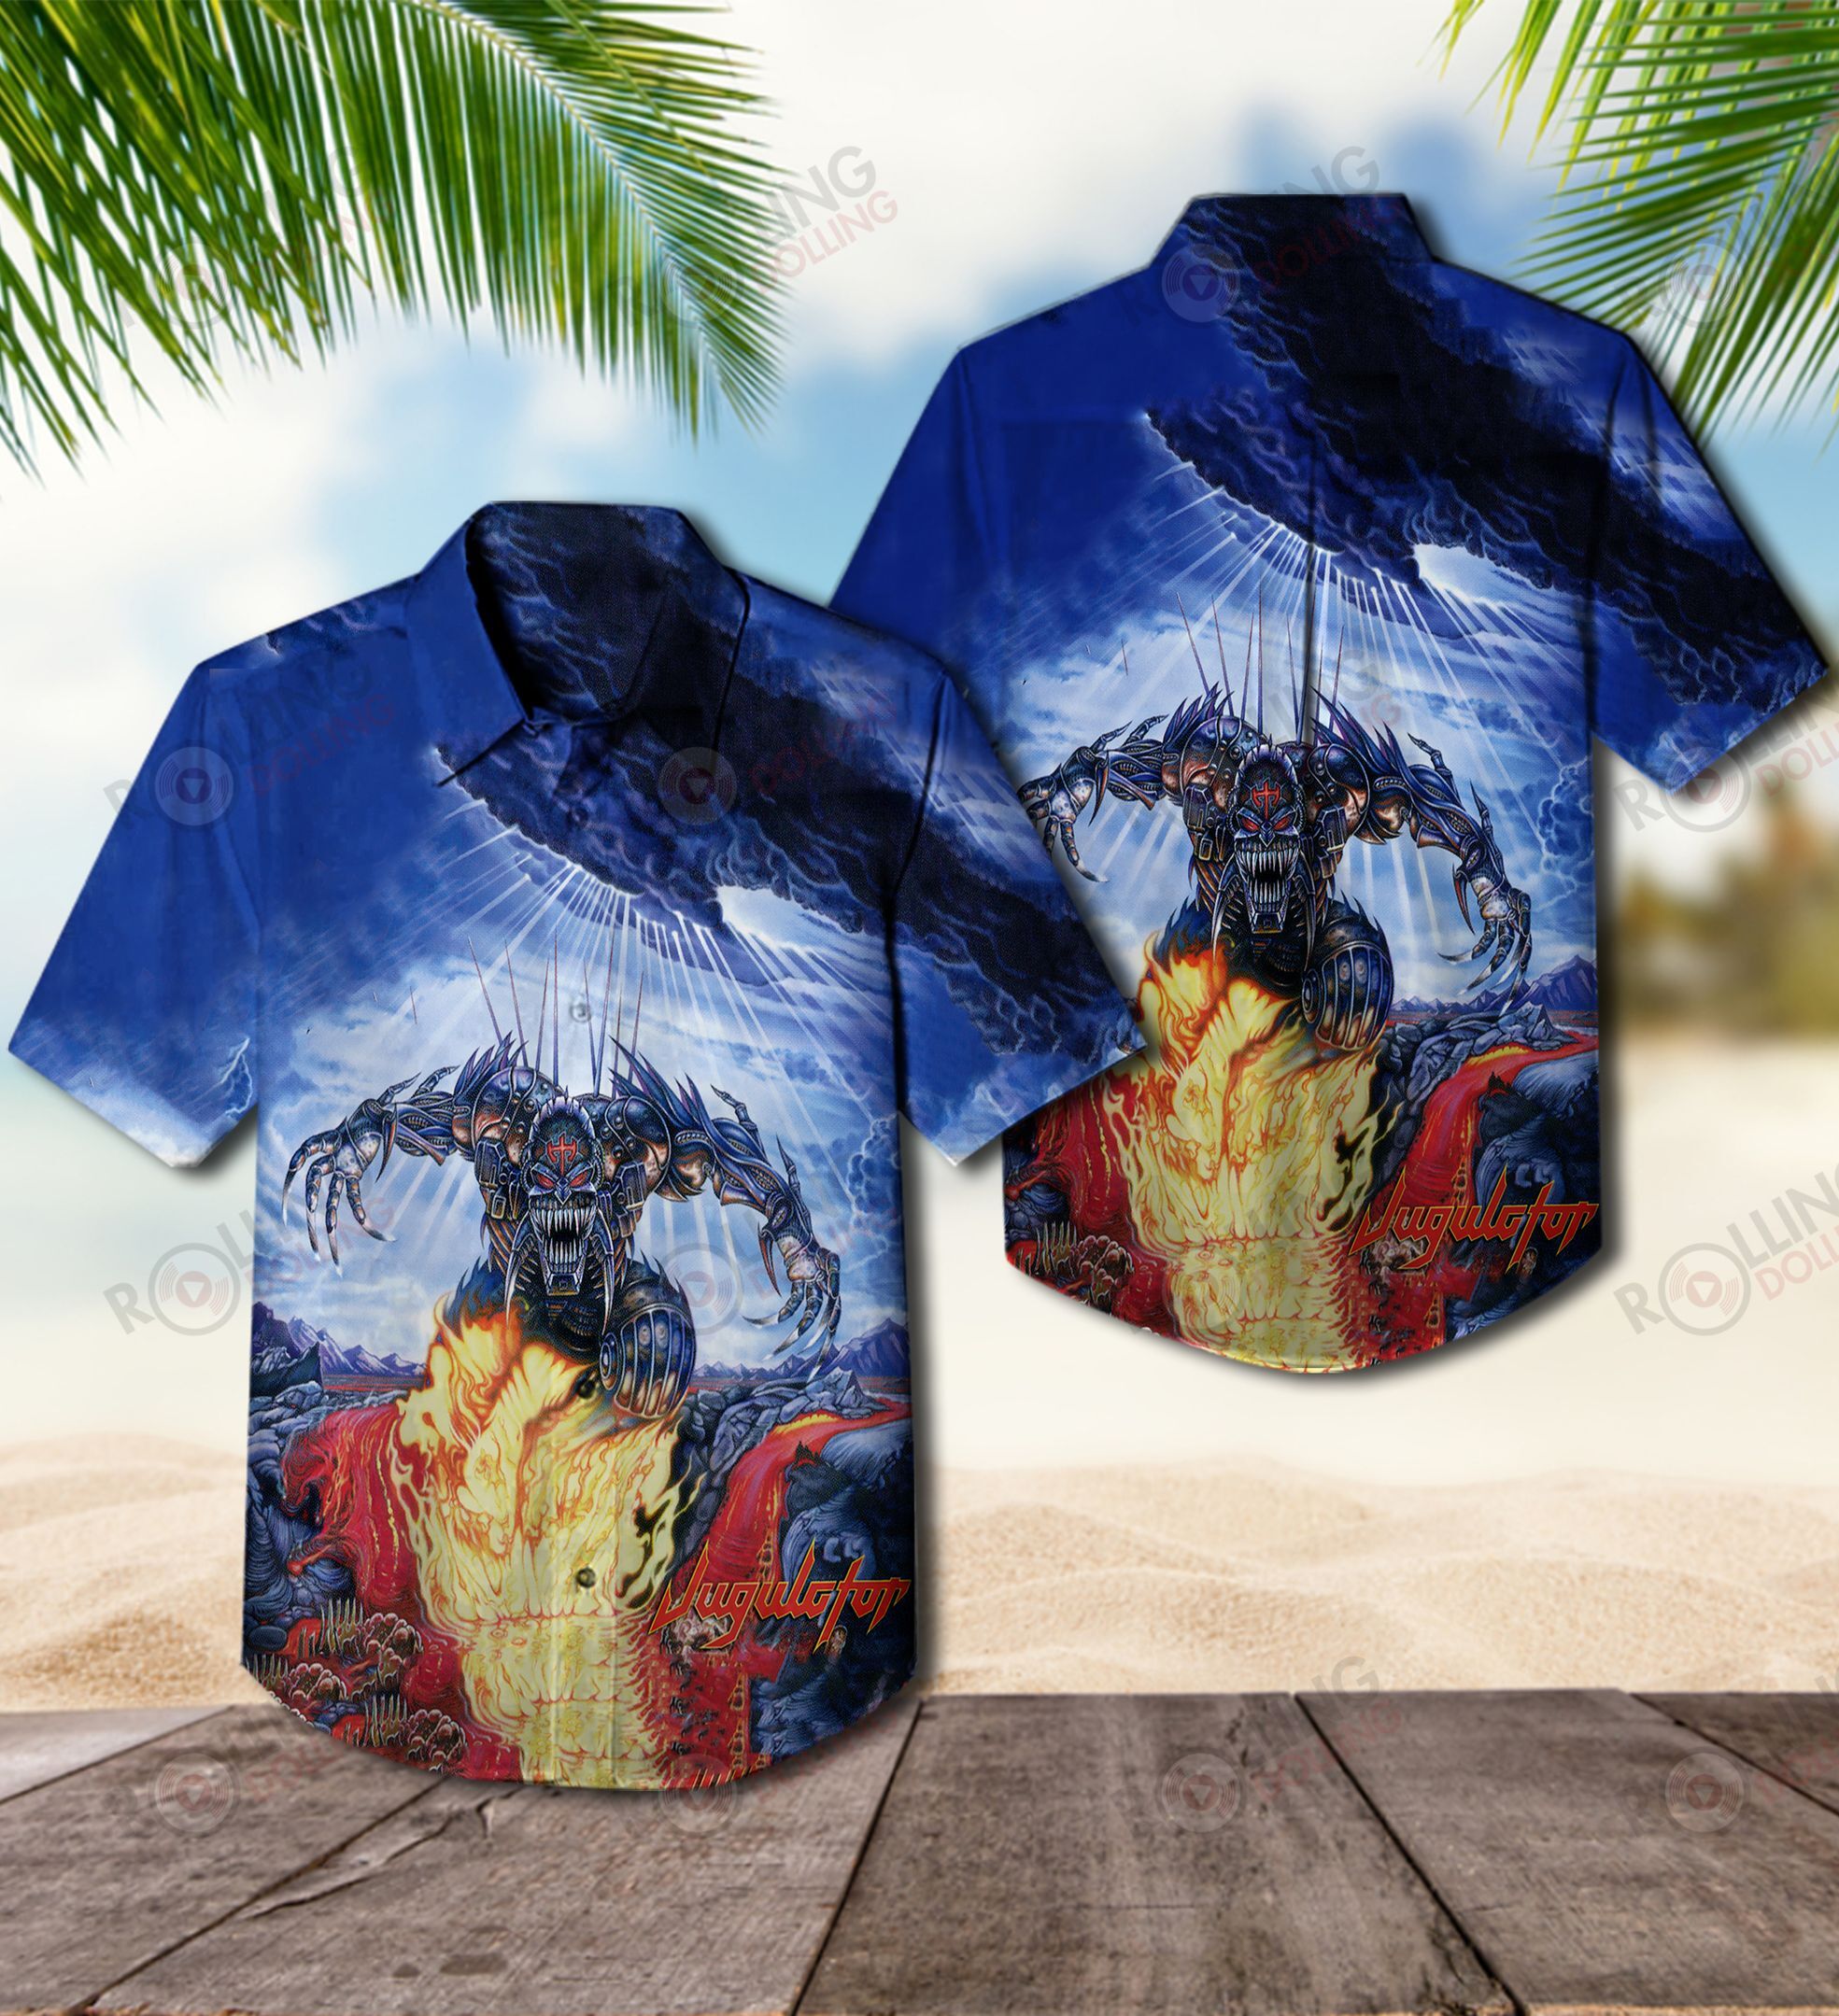 For summer, consider wearing This Amazing Hawaiian Shirt shirt in our store 91